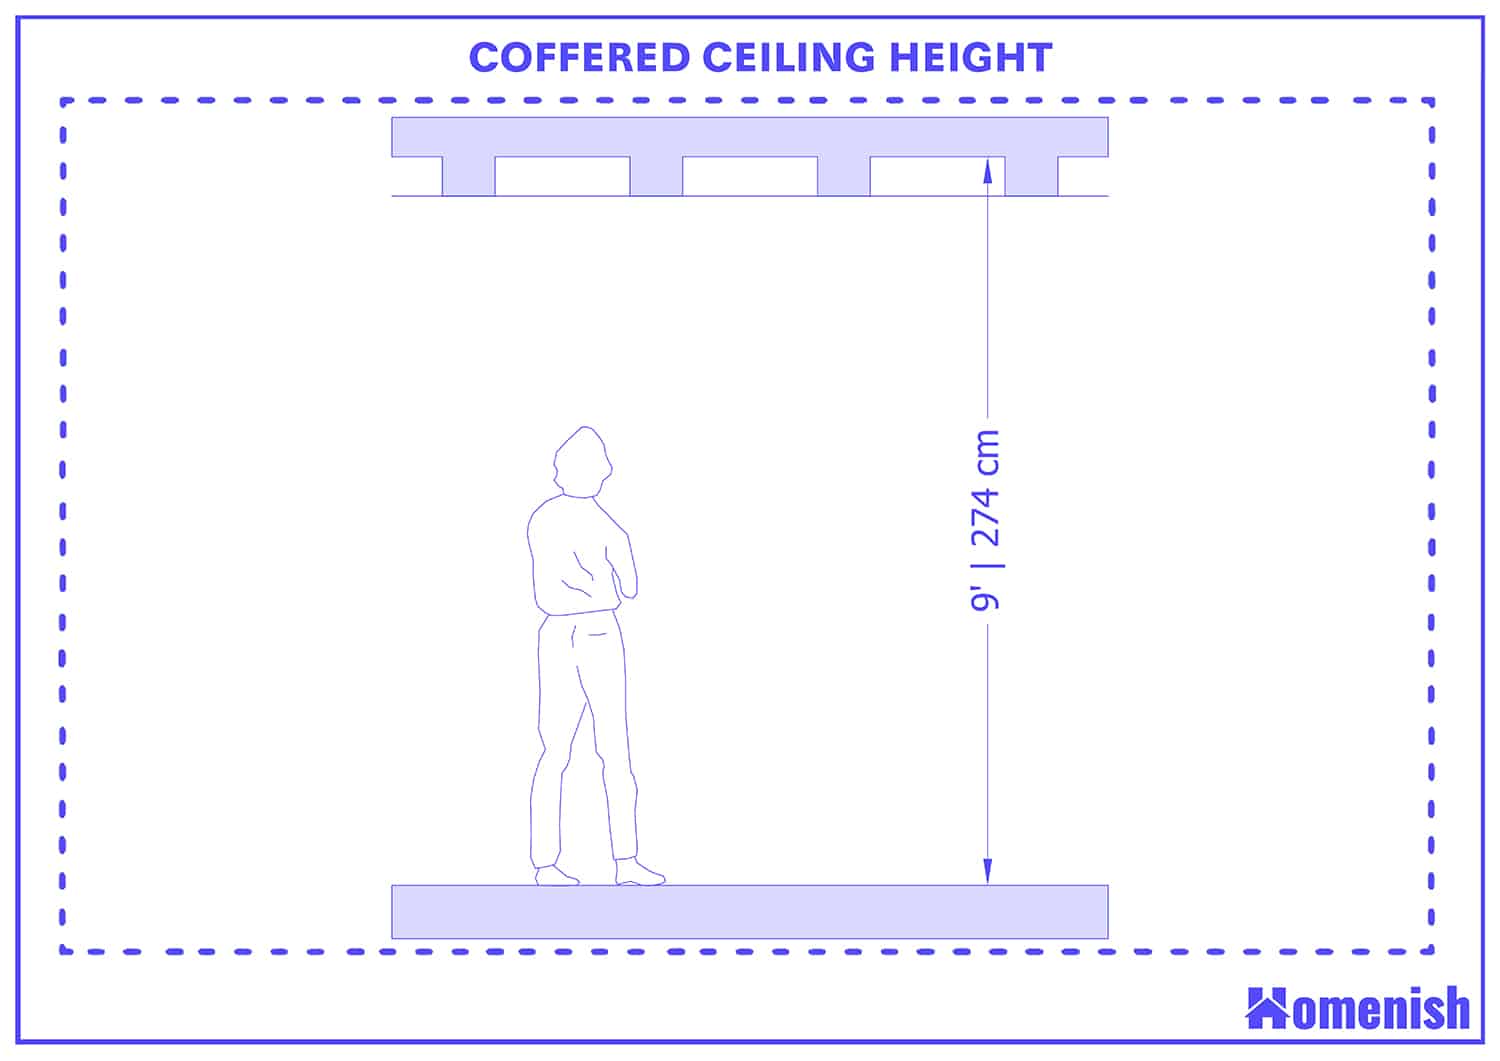 Coffered Ceiling Height